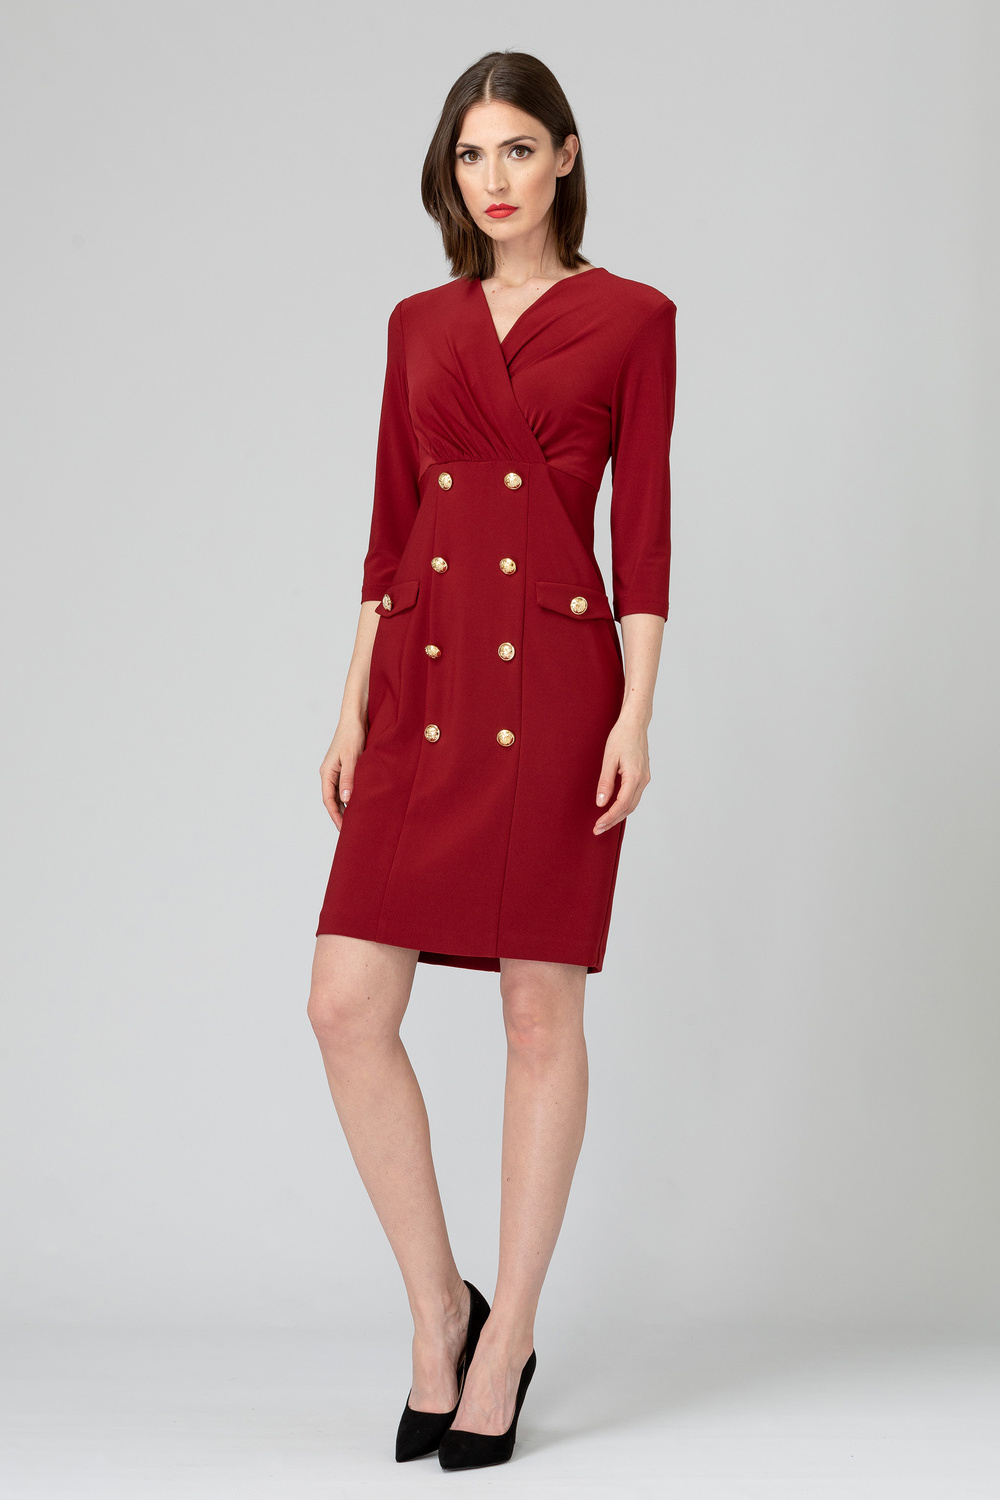 Joseph Ribkoff dress style 193014. Imperial Red 193